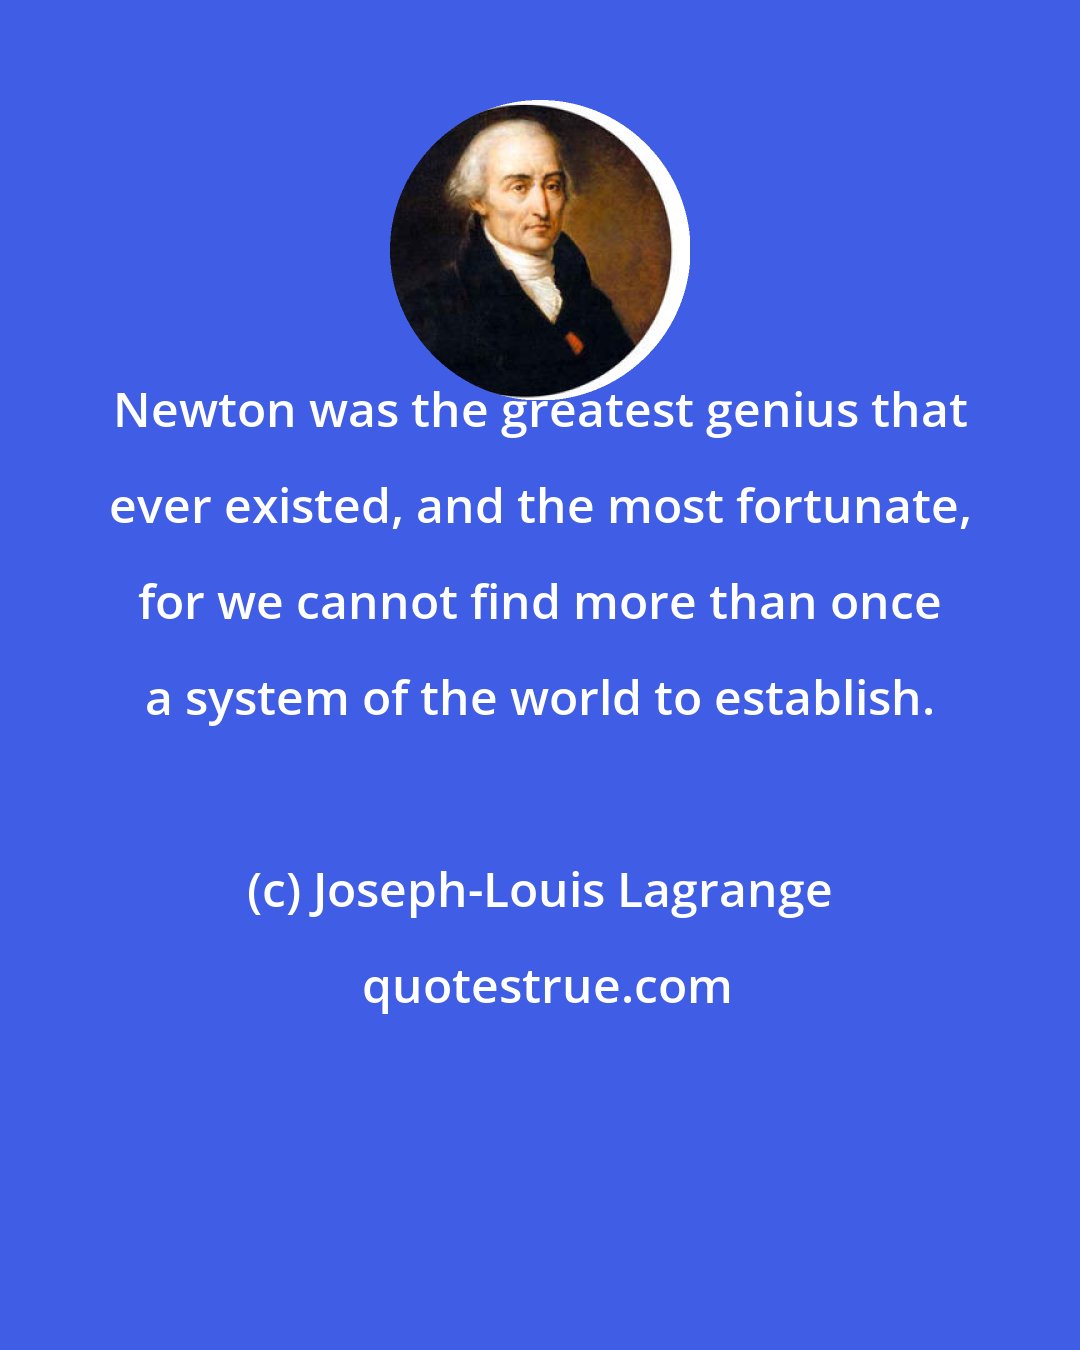 Joseph-Louis Lagrange: Newton was the greatest genius that ever existed, and the most fortunate, for we cannot find more than once a system of the world to establish.